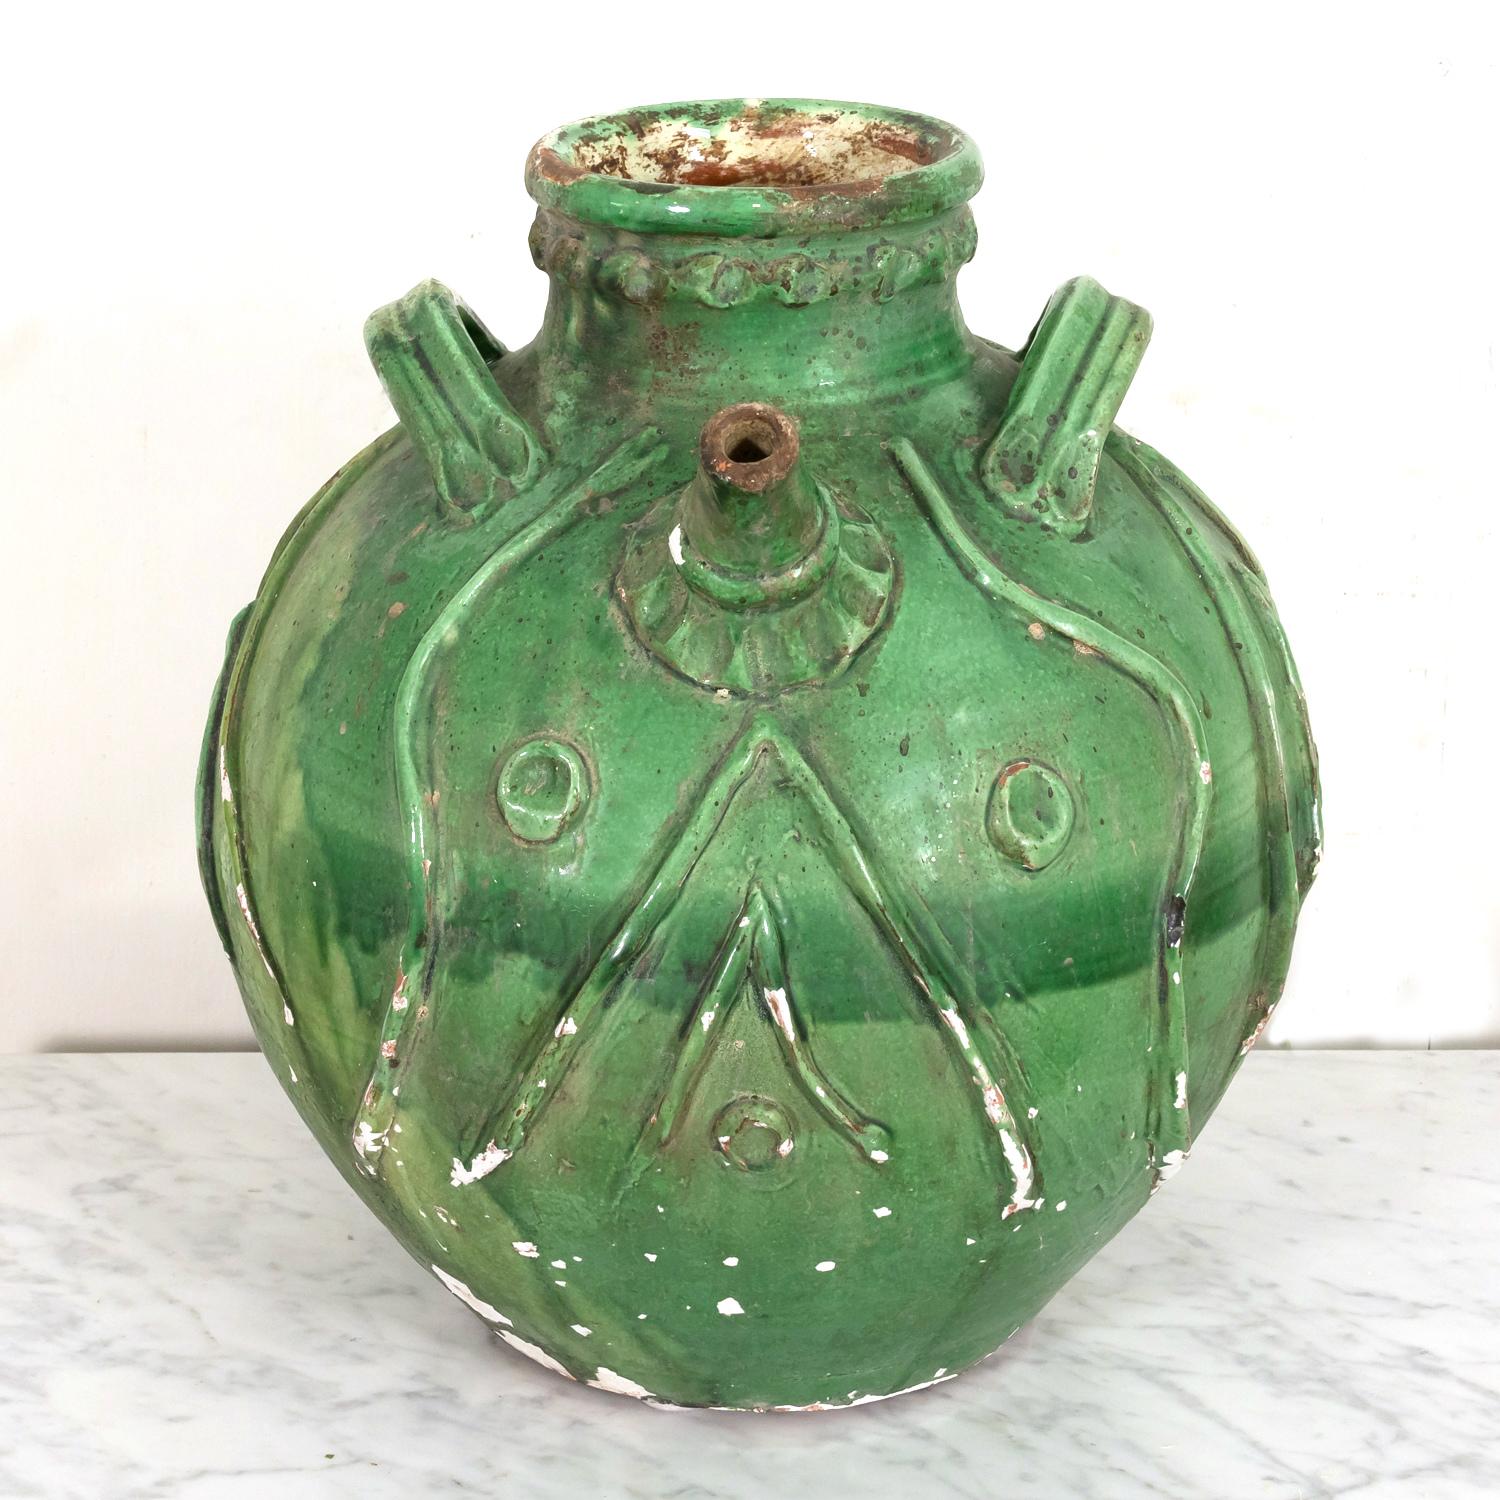 A large and exceptional early 19th century French terracotta walnut oil jug, probably from the Auvergne region, with a beautiful and vibrant green glaze, circa 1810s. Having a round shaped belly with three high arching looped handles and a pouring